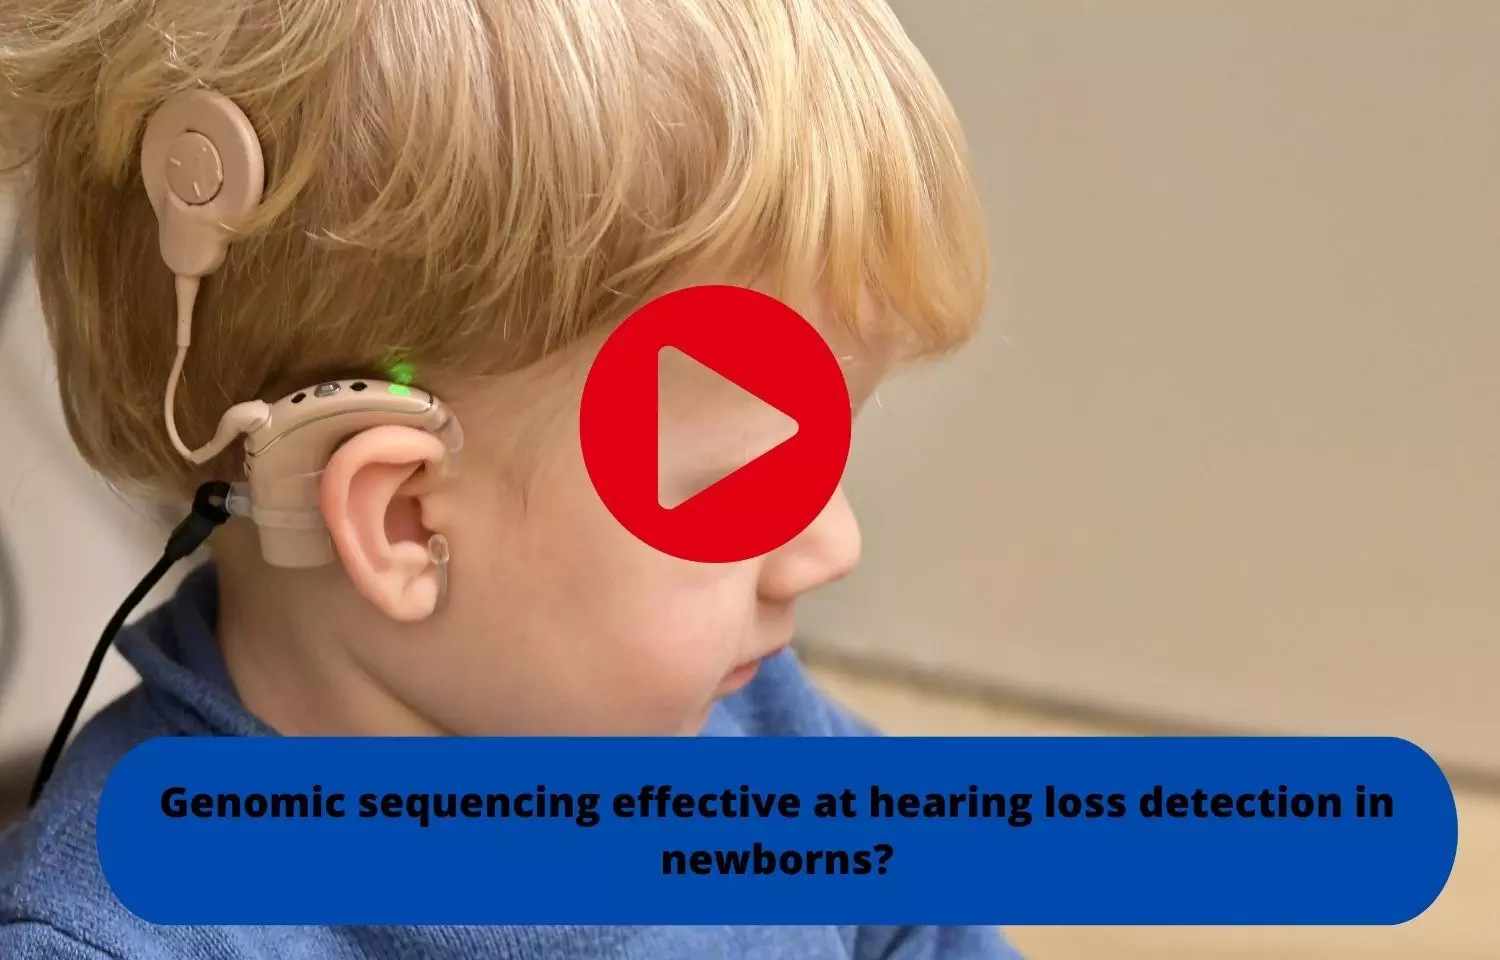 Genomic sequencing effective at hearing loss detection in newborns?